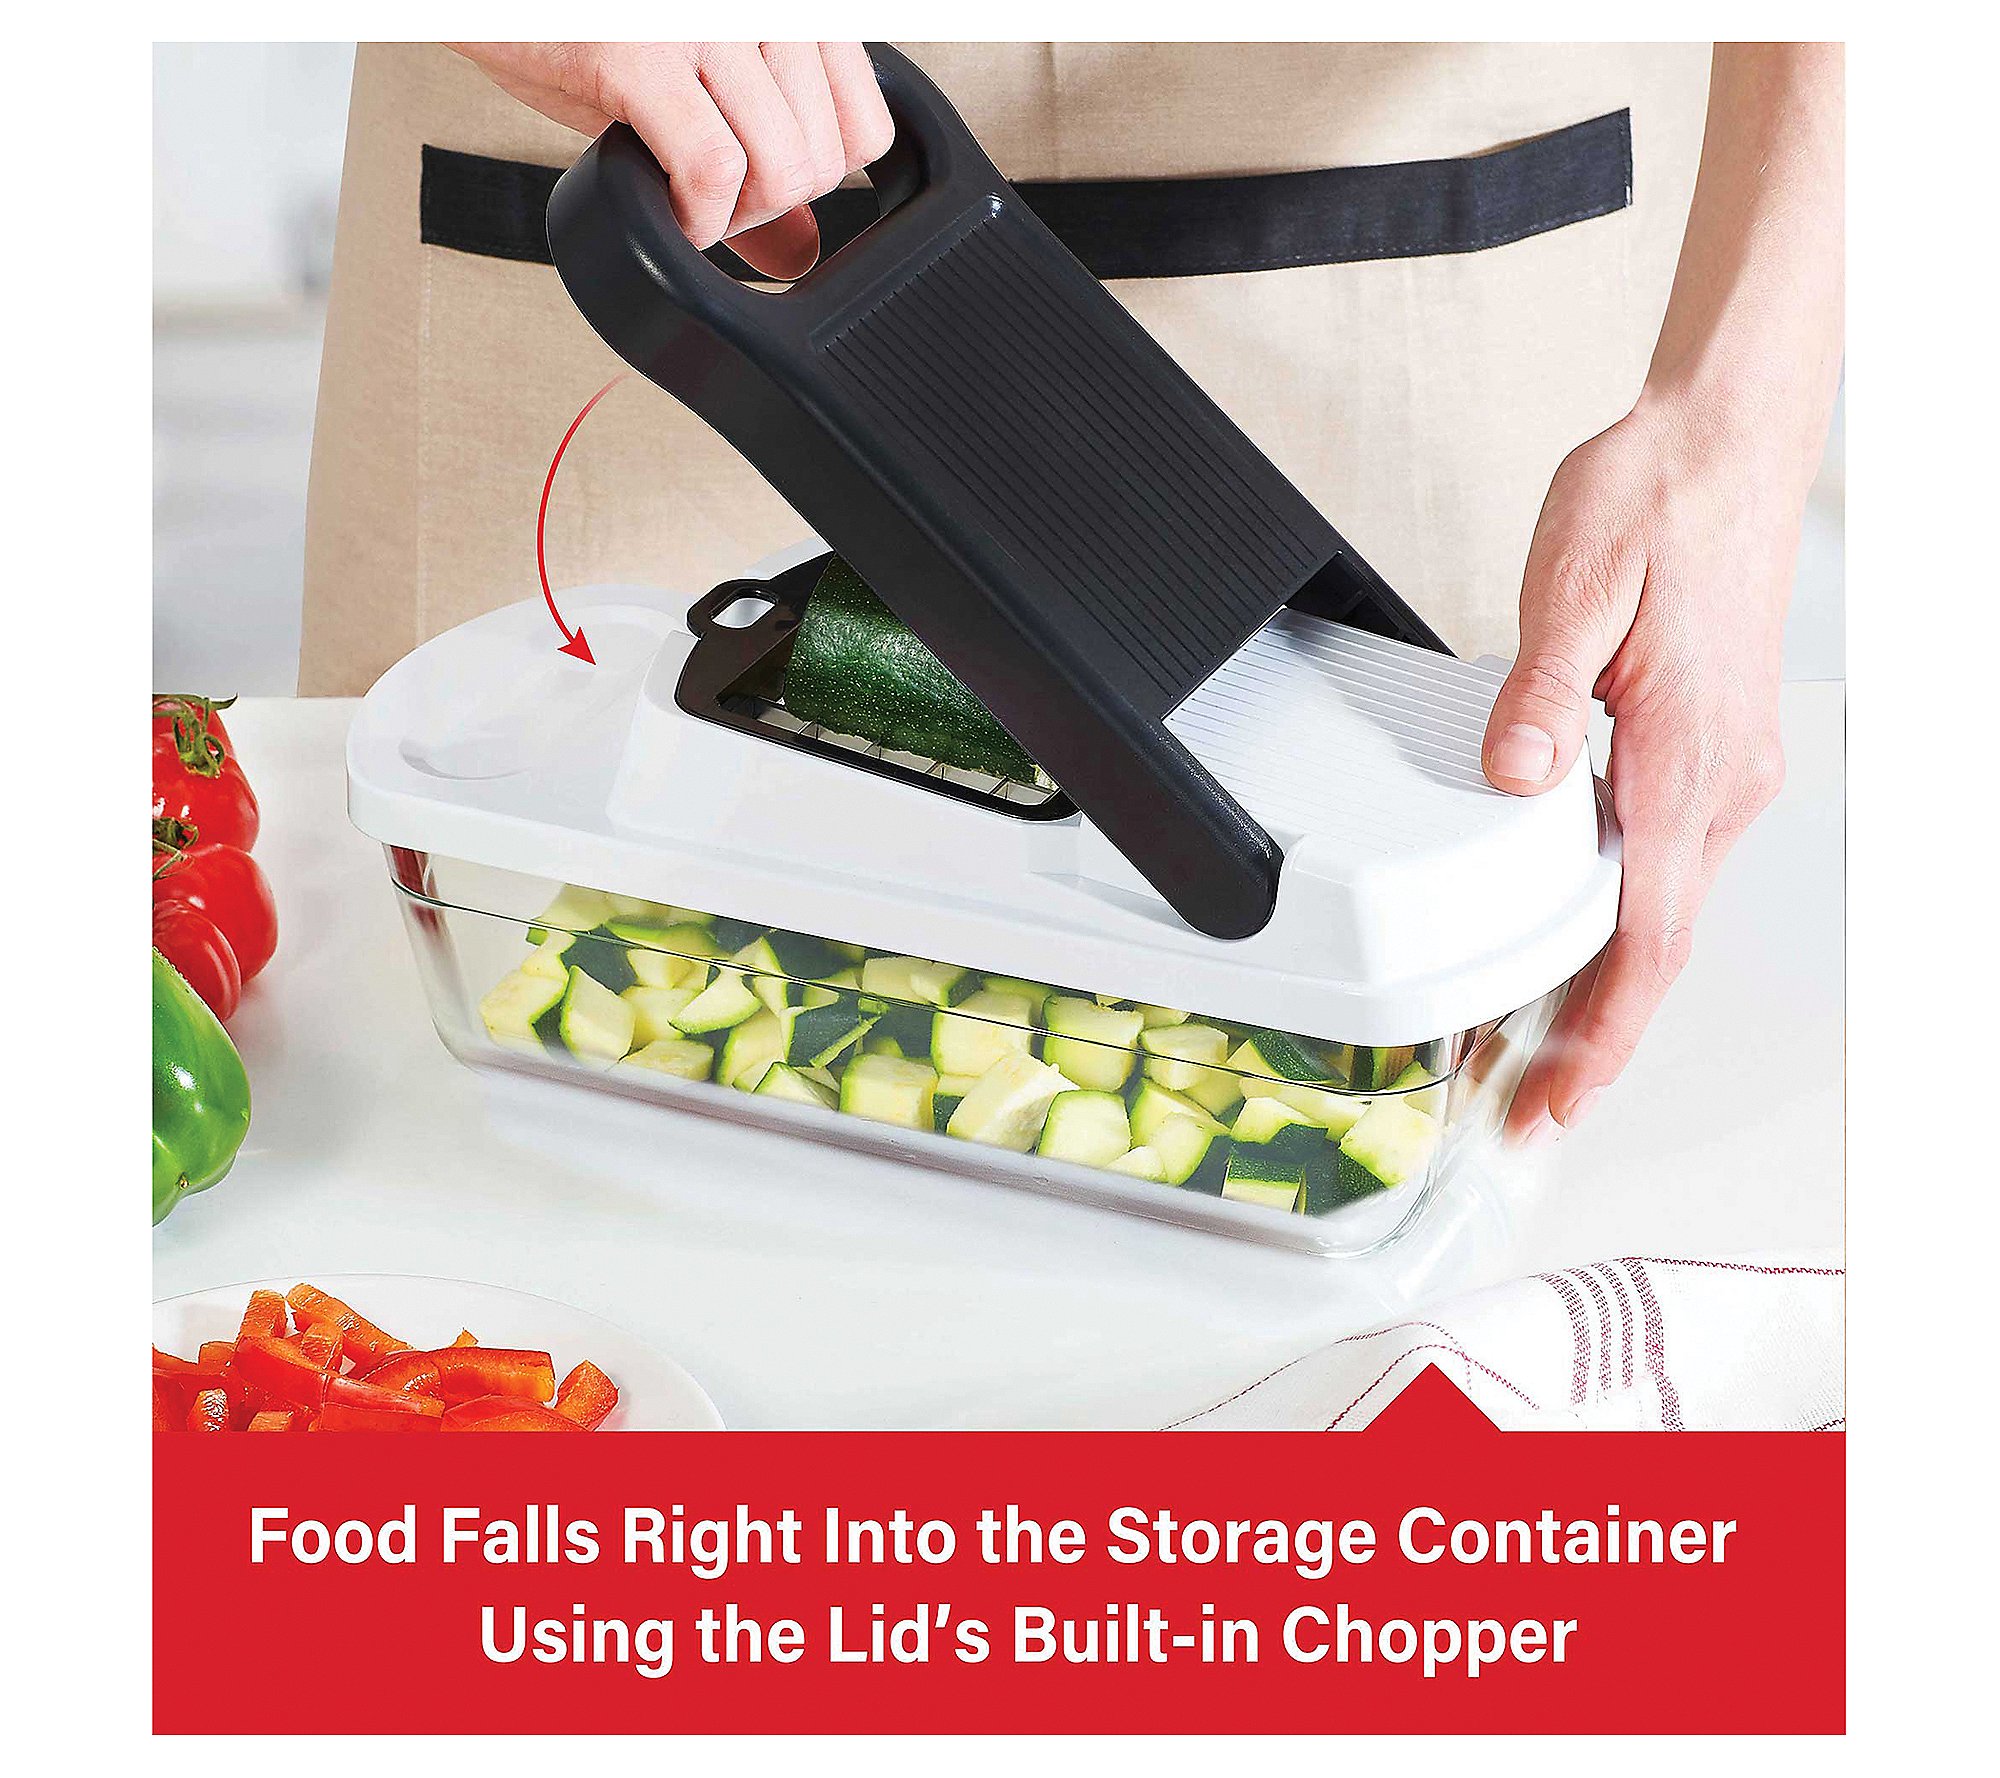 Brentwood Pro Food Chopper and Vegetable Dicer